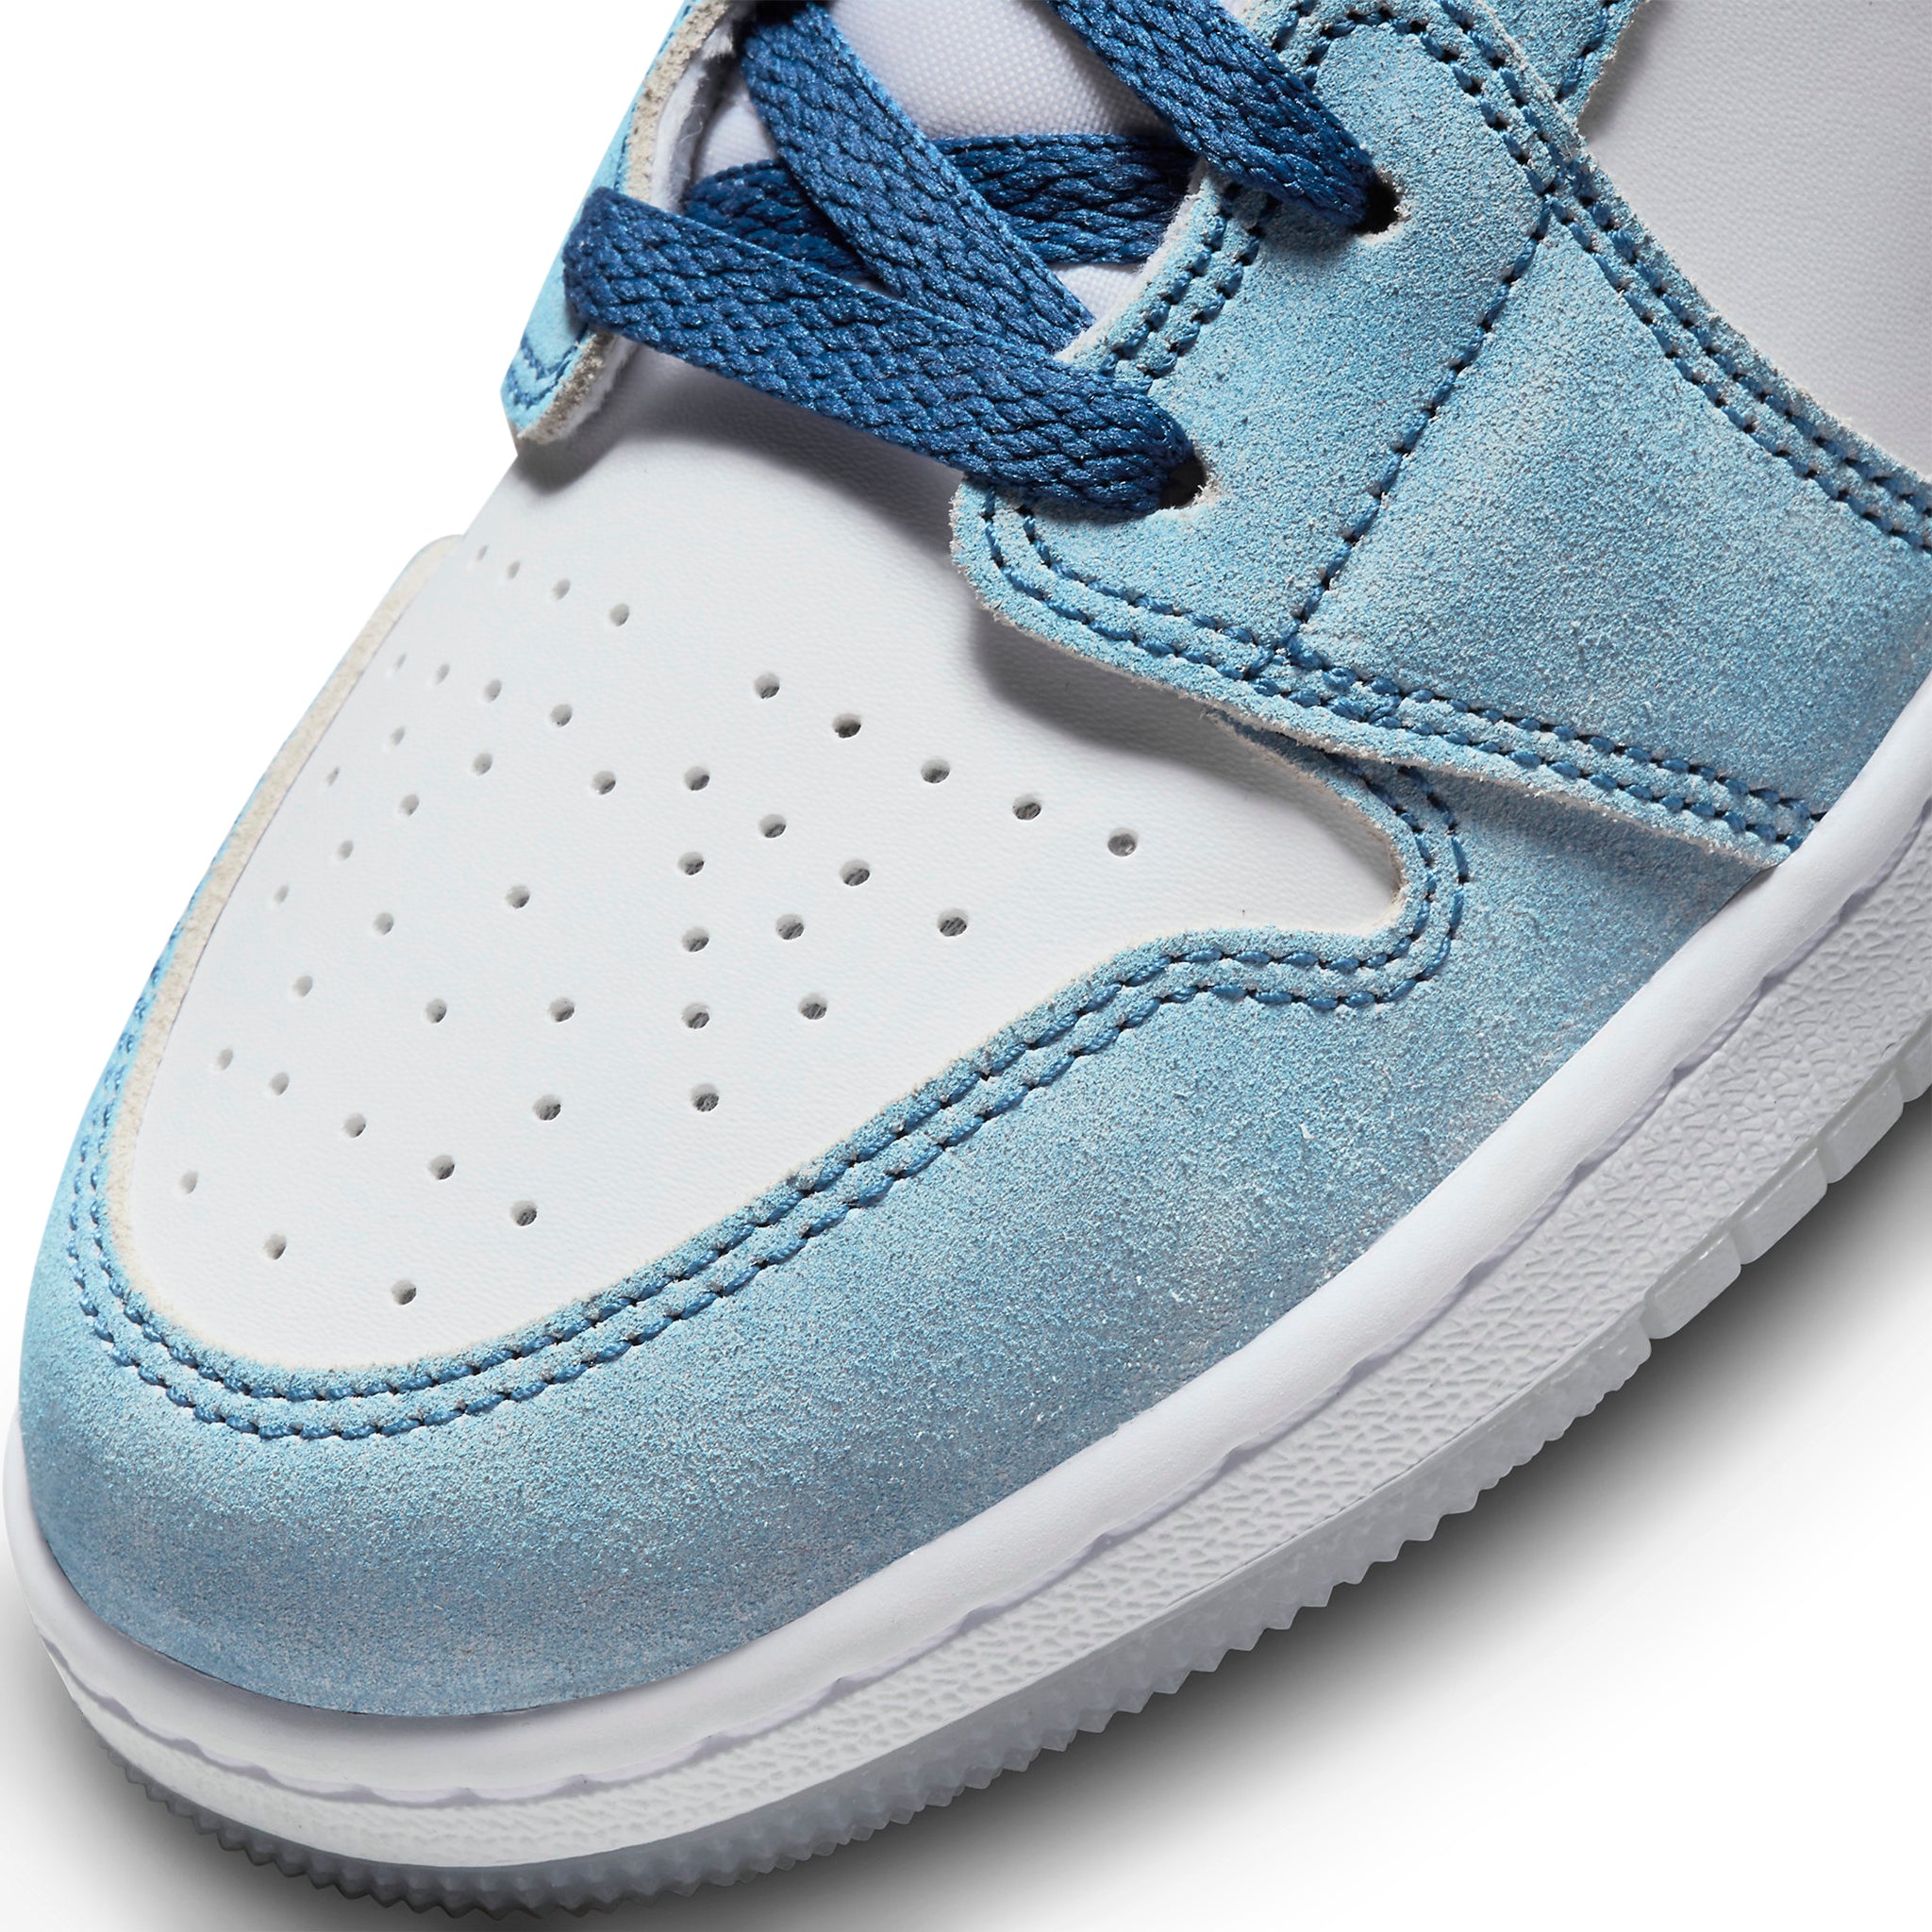 Toe box view of Air Jordan 1 Mid SE French Blue Light Steel (GS) DR6235-401